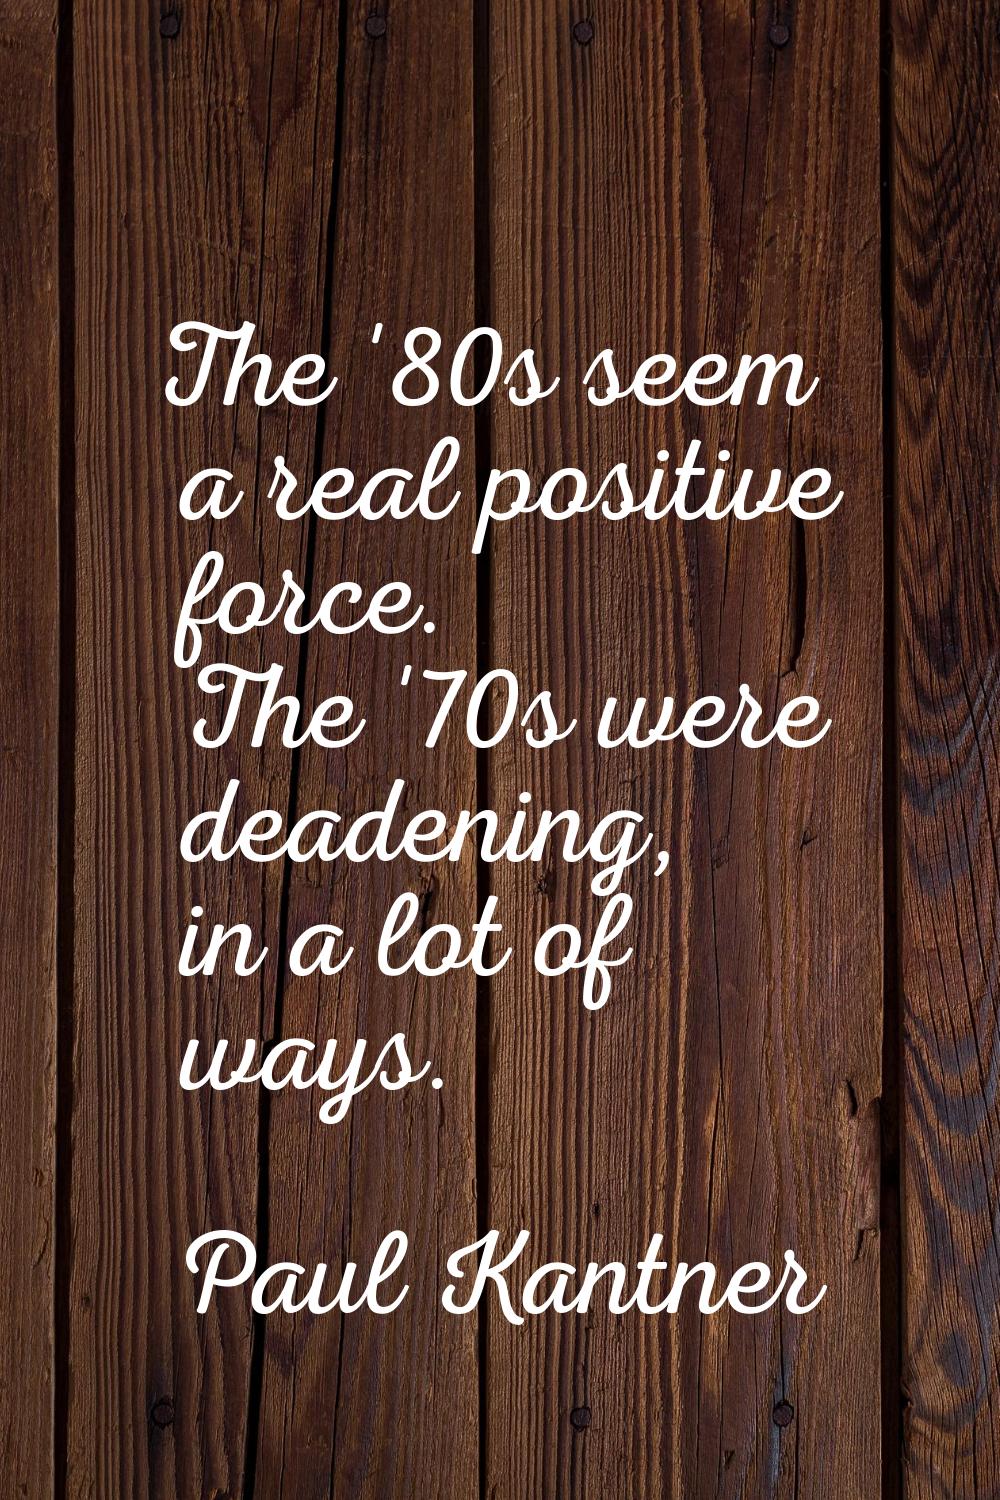 The '80s seem a real positive force. The '70s were deadening, in a lot of ways.